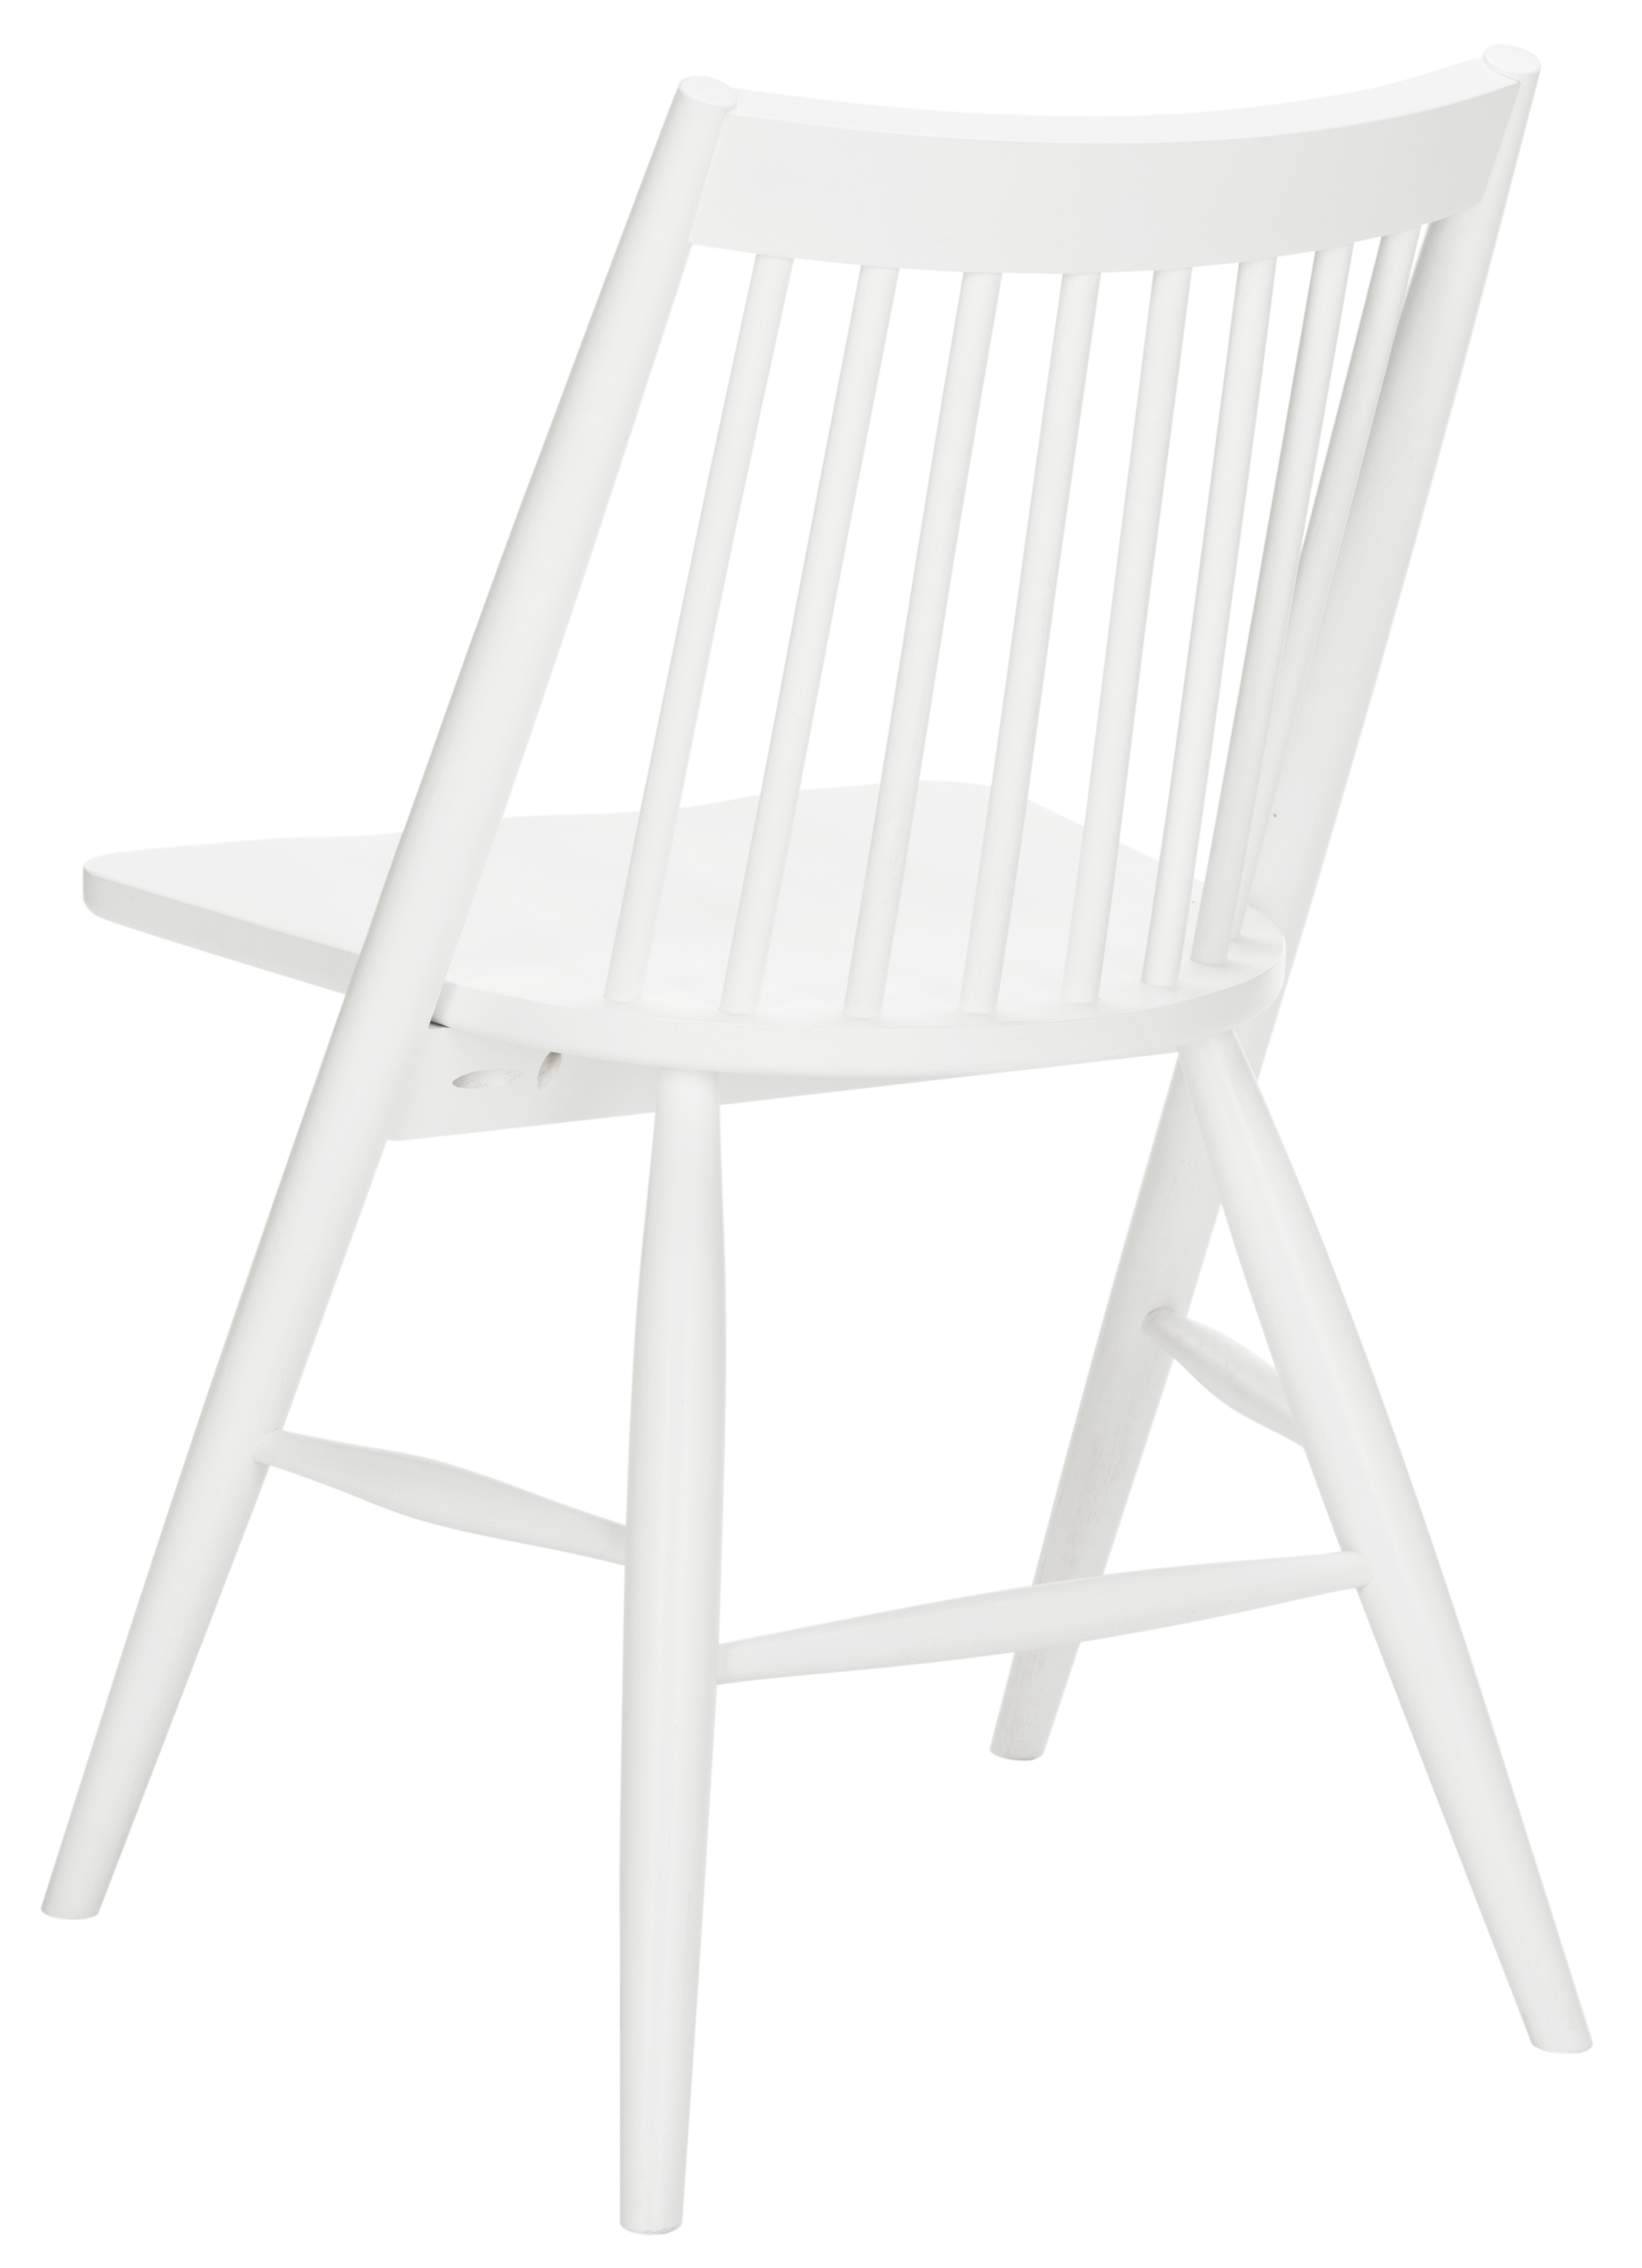 Ames Chairs, White, Set of 2 - Image 5